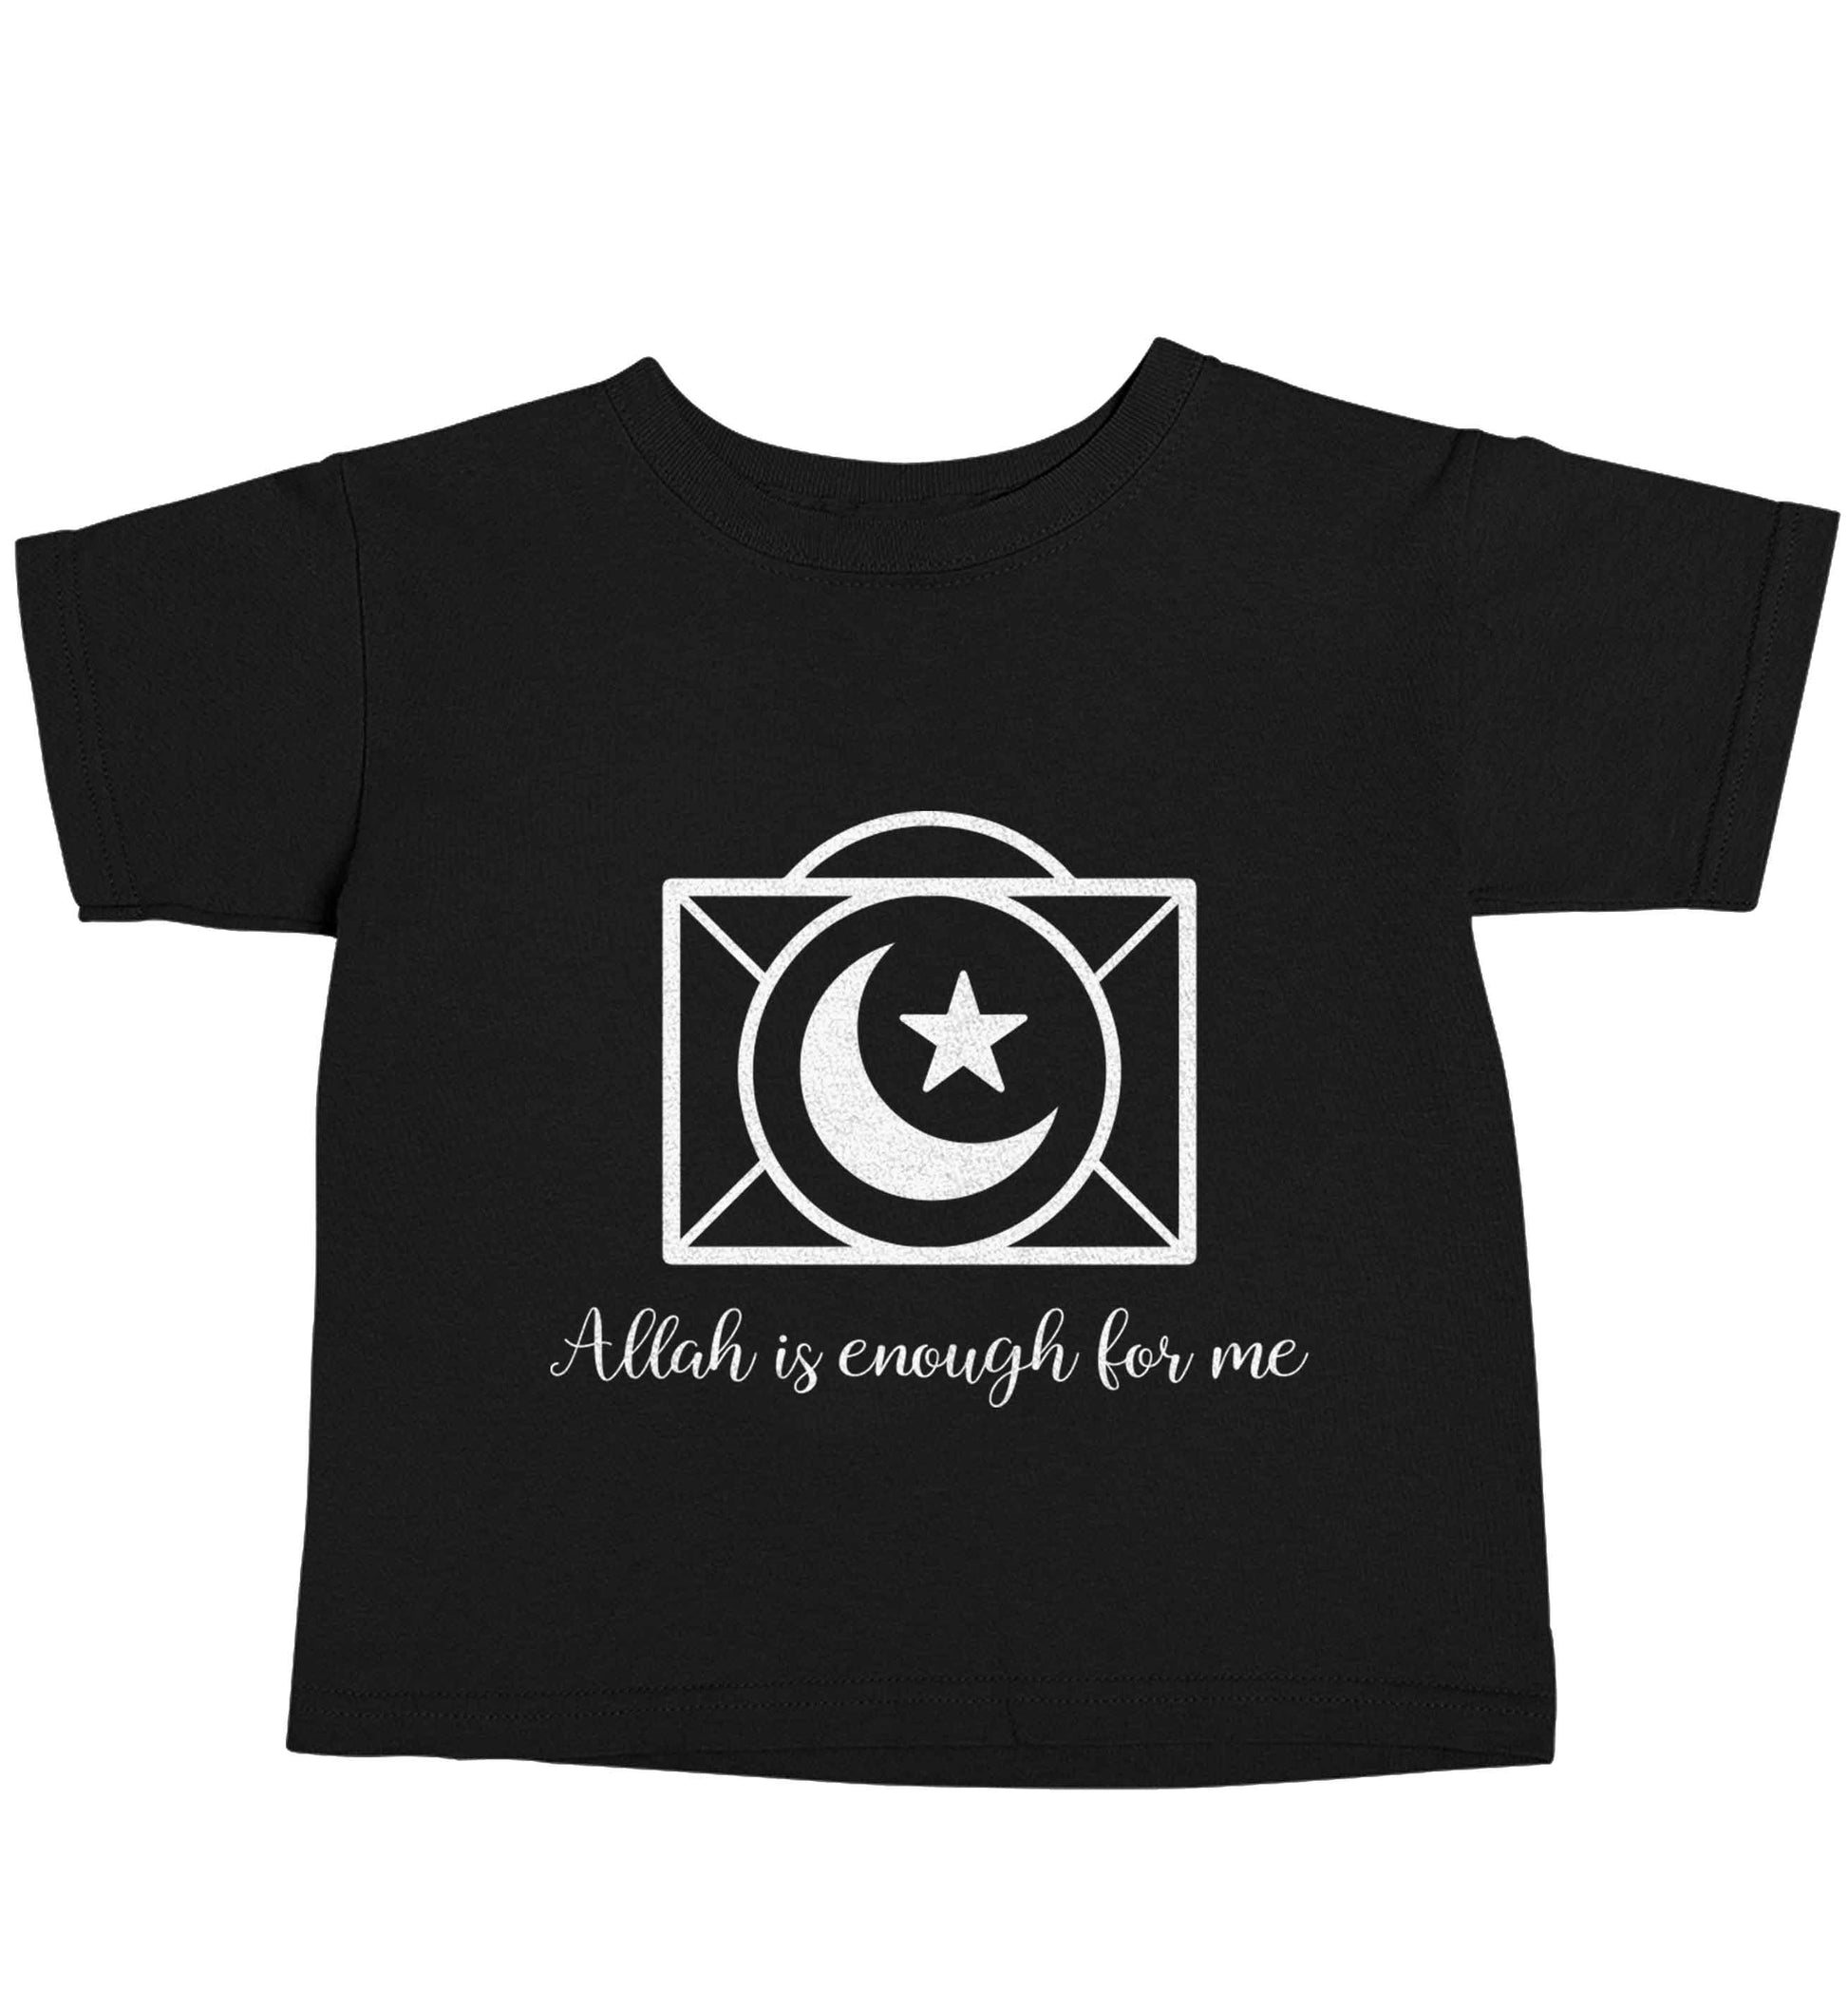 Allah is enough for me Black baby toddler Tshirt 2 years